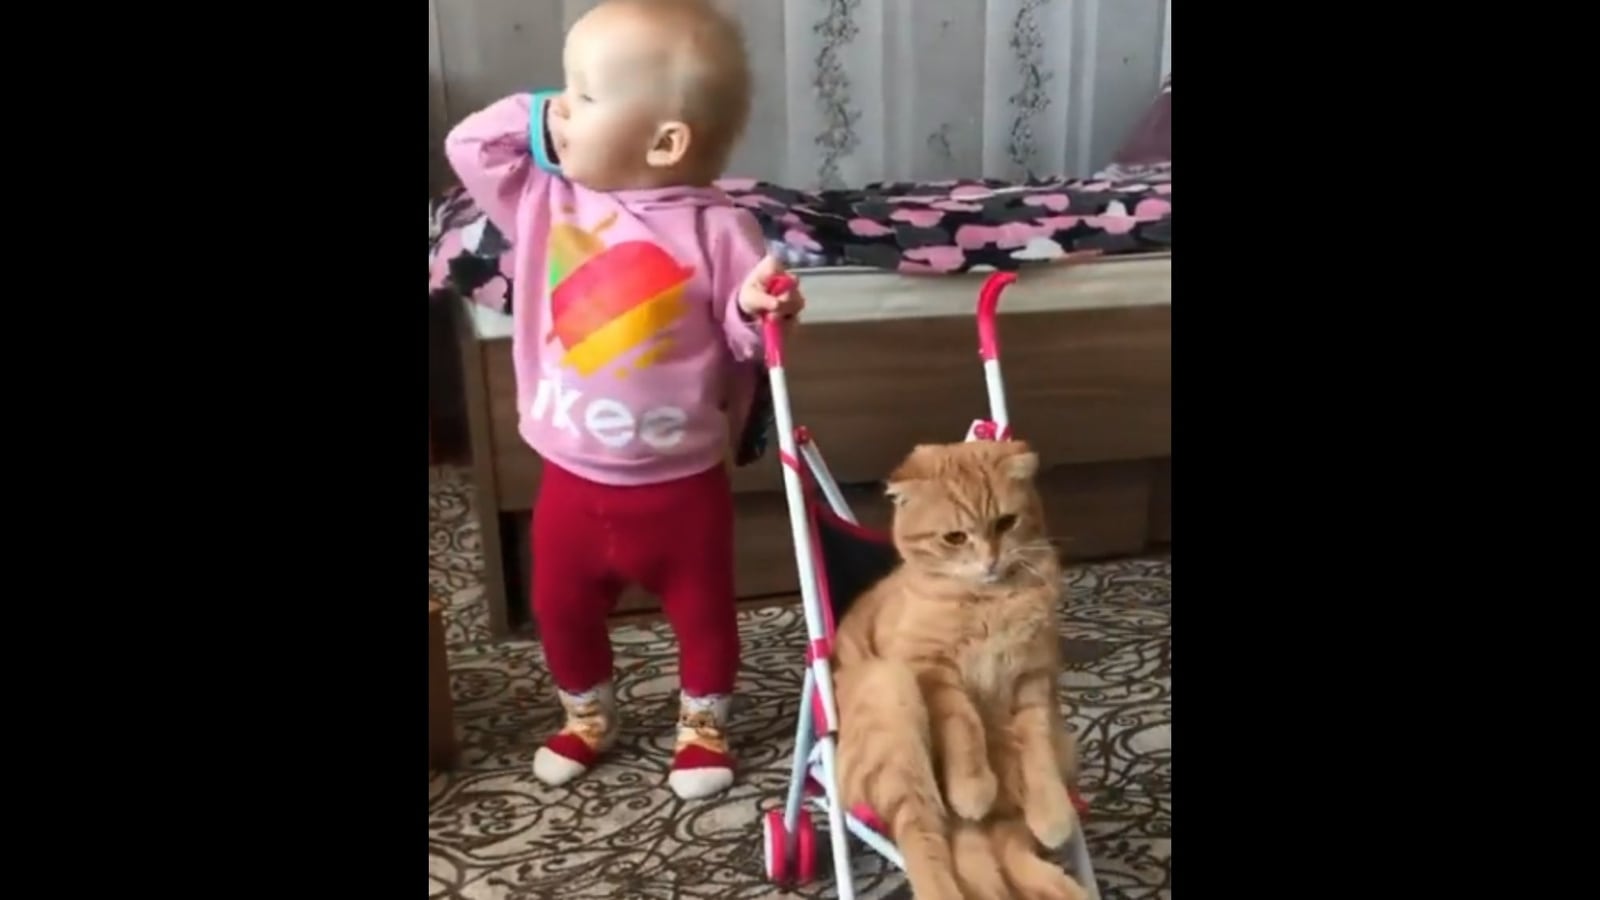 Kid talks on toy phone while pushing cat on stroller, then does this. Watch